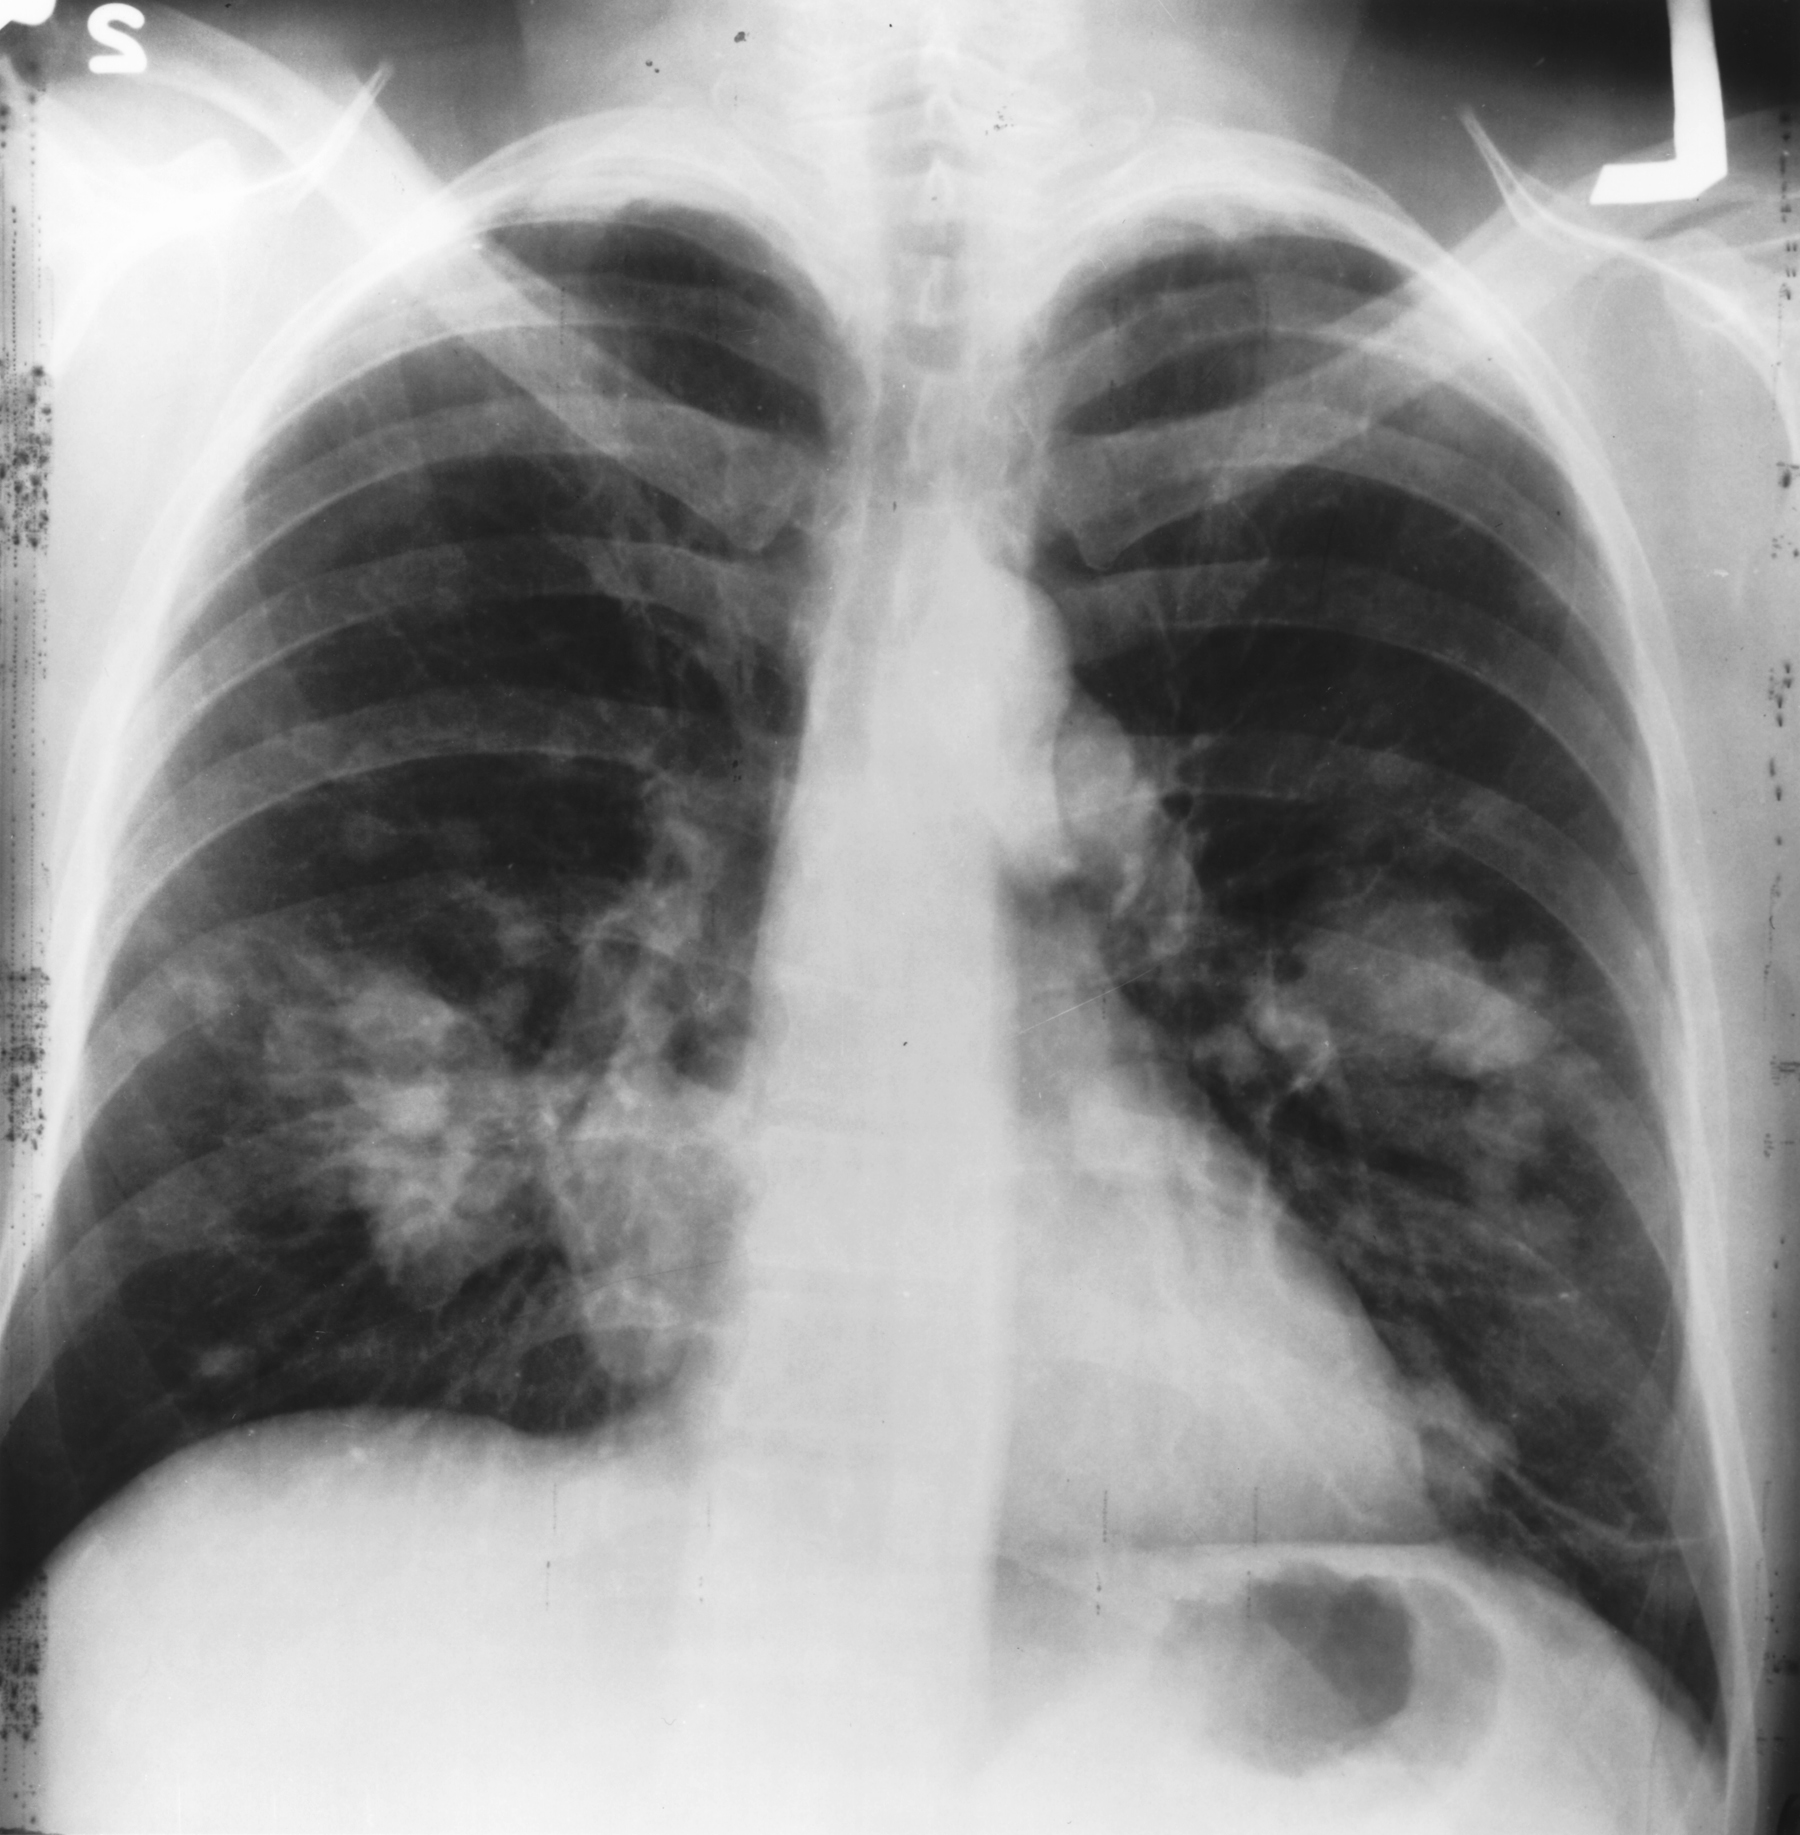 Lung Cancer Surgery Can Be Beneficial For High Risk Patients With Early Stage Disease The